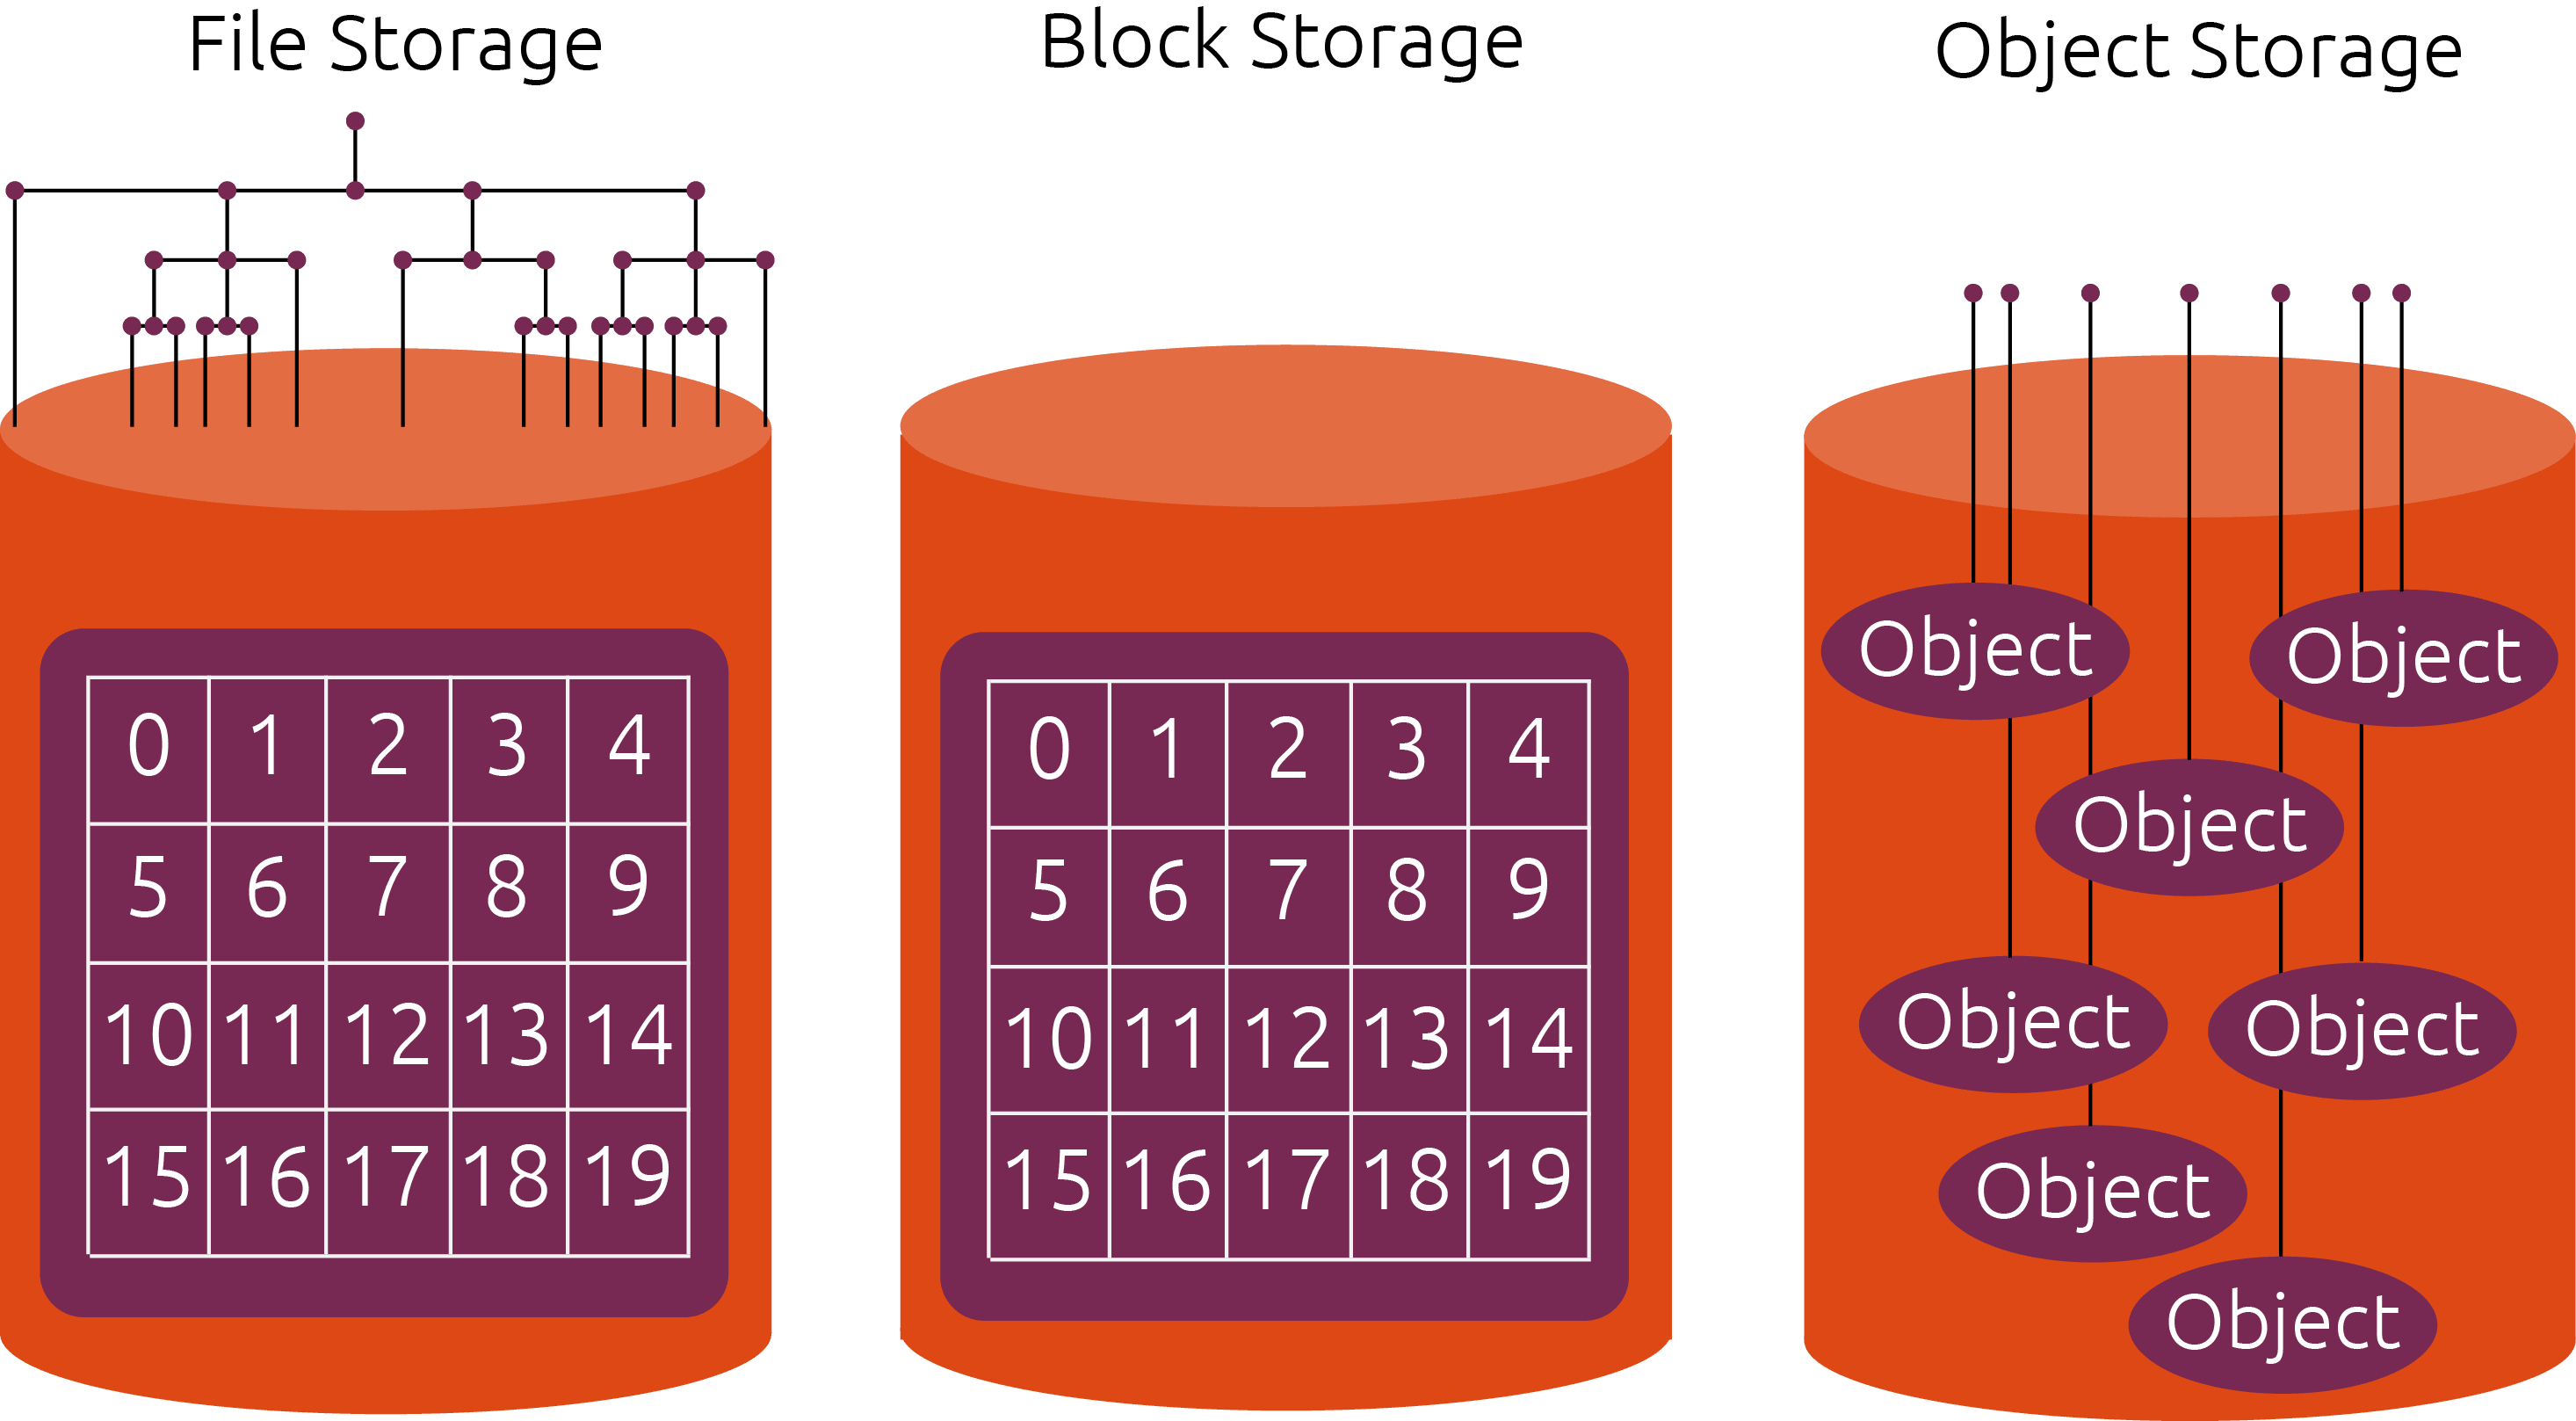 Bildquelle: [Canonical](https://canonical.com/blog/what-are-the-different-types-of-storage-block-object-and-file)